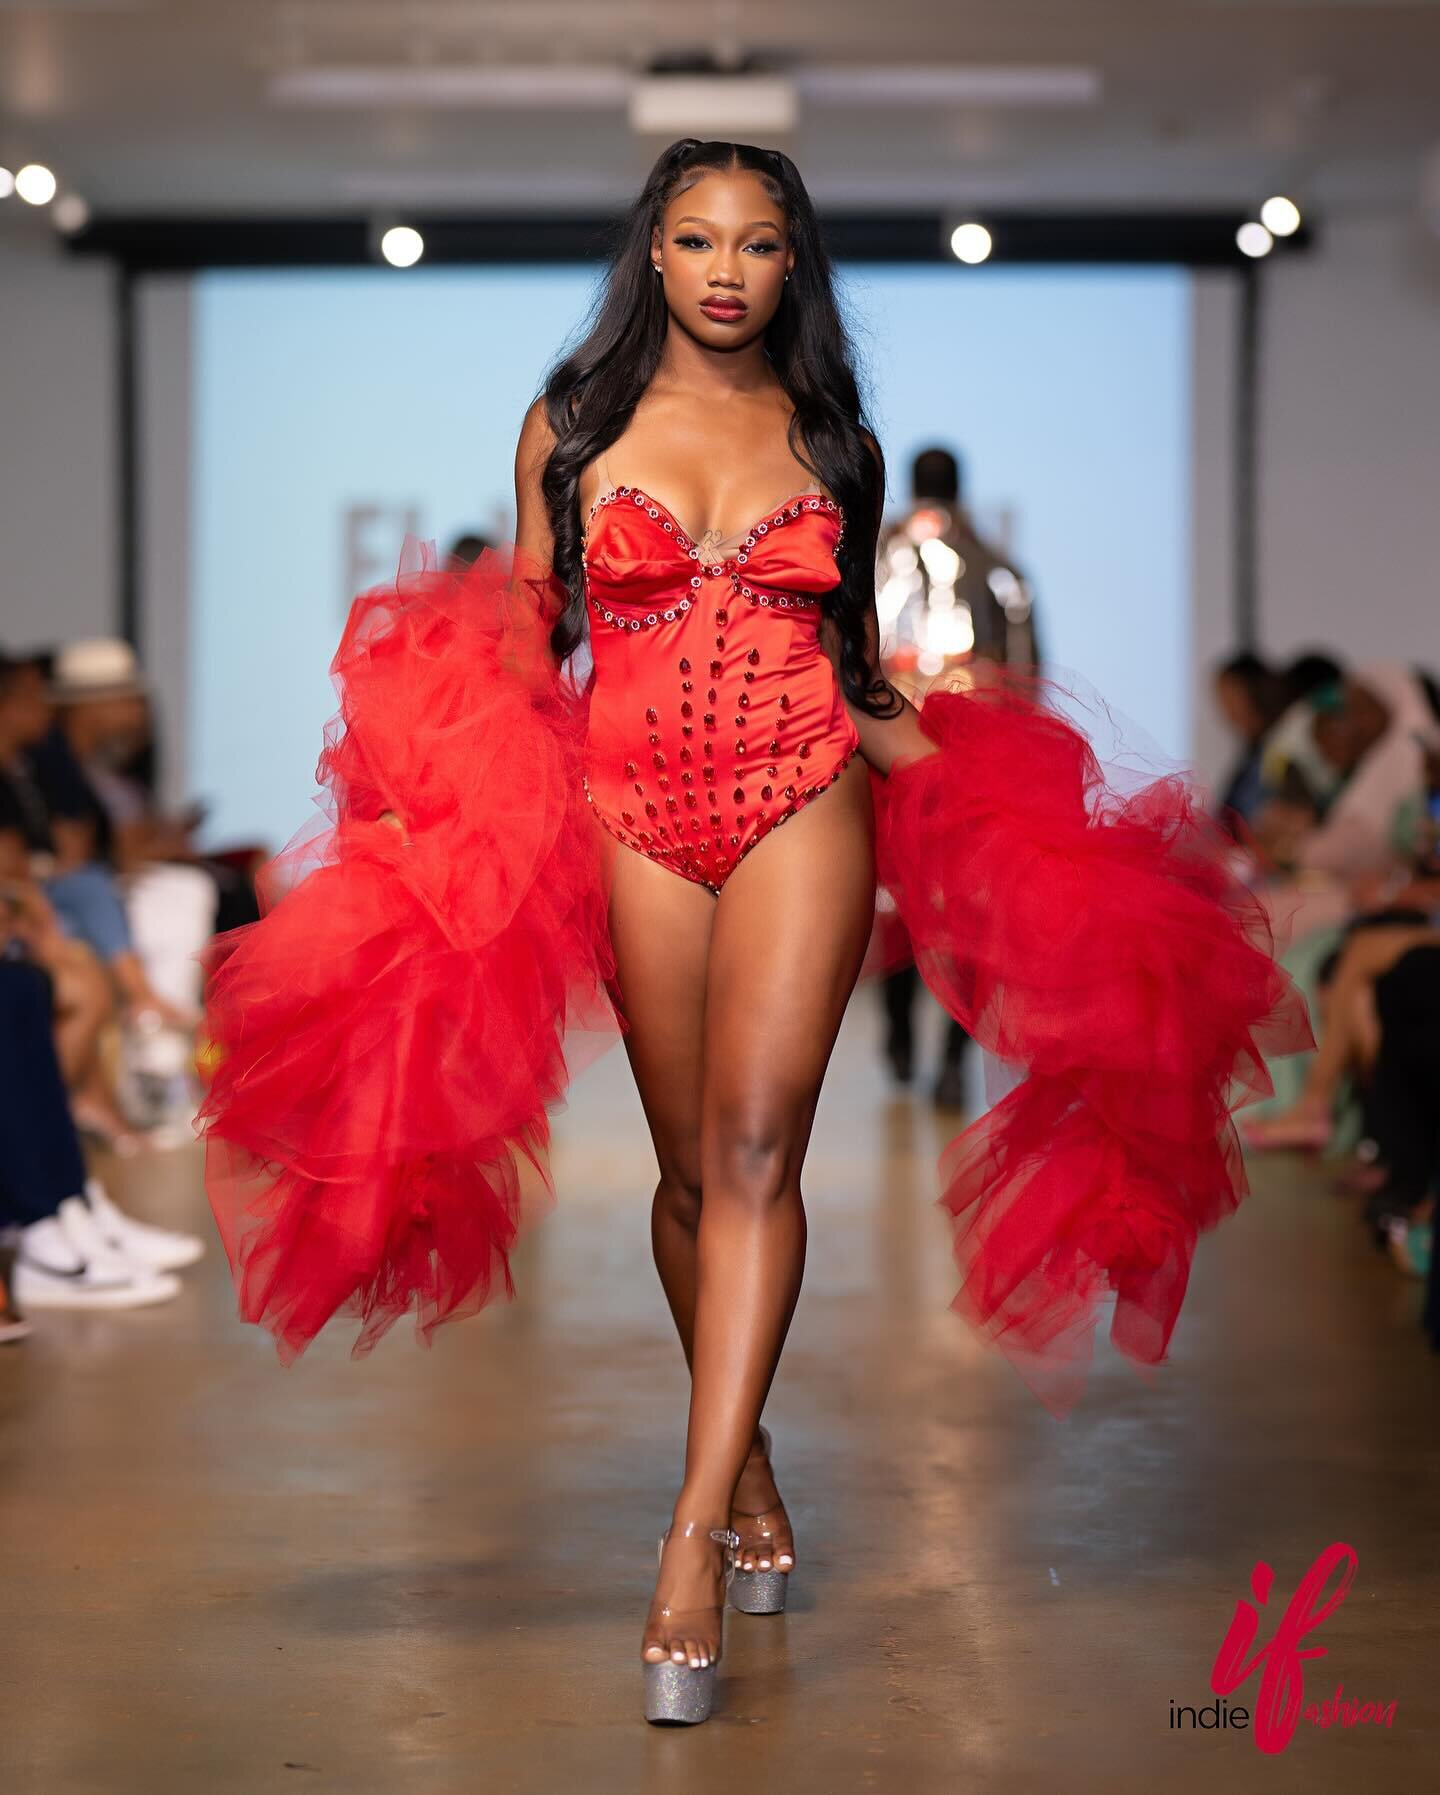 Indie Fashion Show returns to DC July 2024

Model and Designer Registration now open at www.INDIEFASH.com

Join the &ldquo;The Heart of Independent Fashion Tour&rdquo; 2024

Photos by @phelanmarc 

#indiefash #fashion #fashionshow #independentfashion